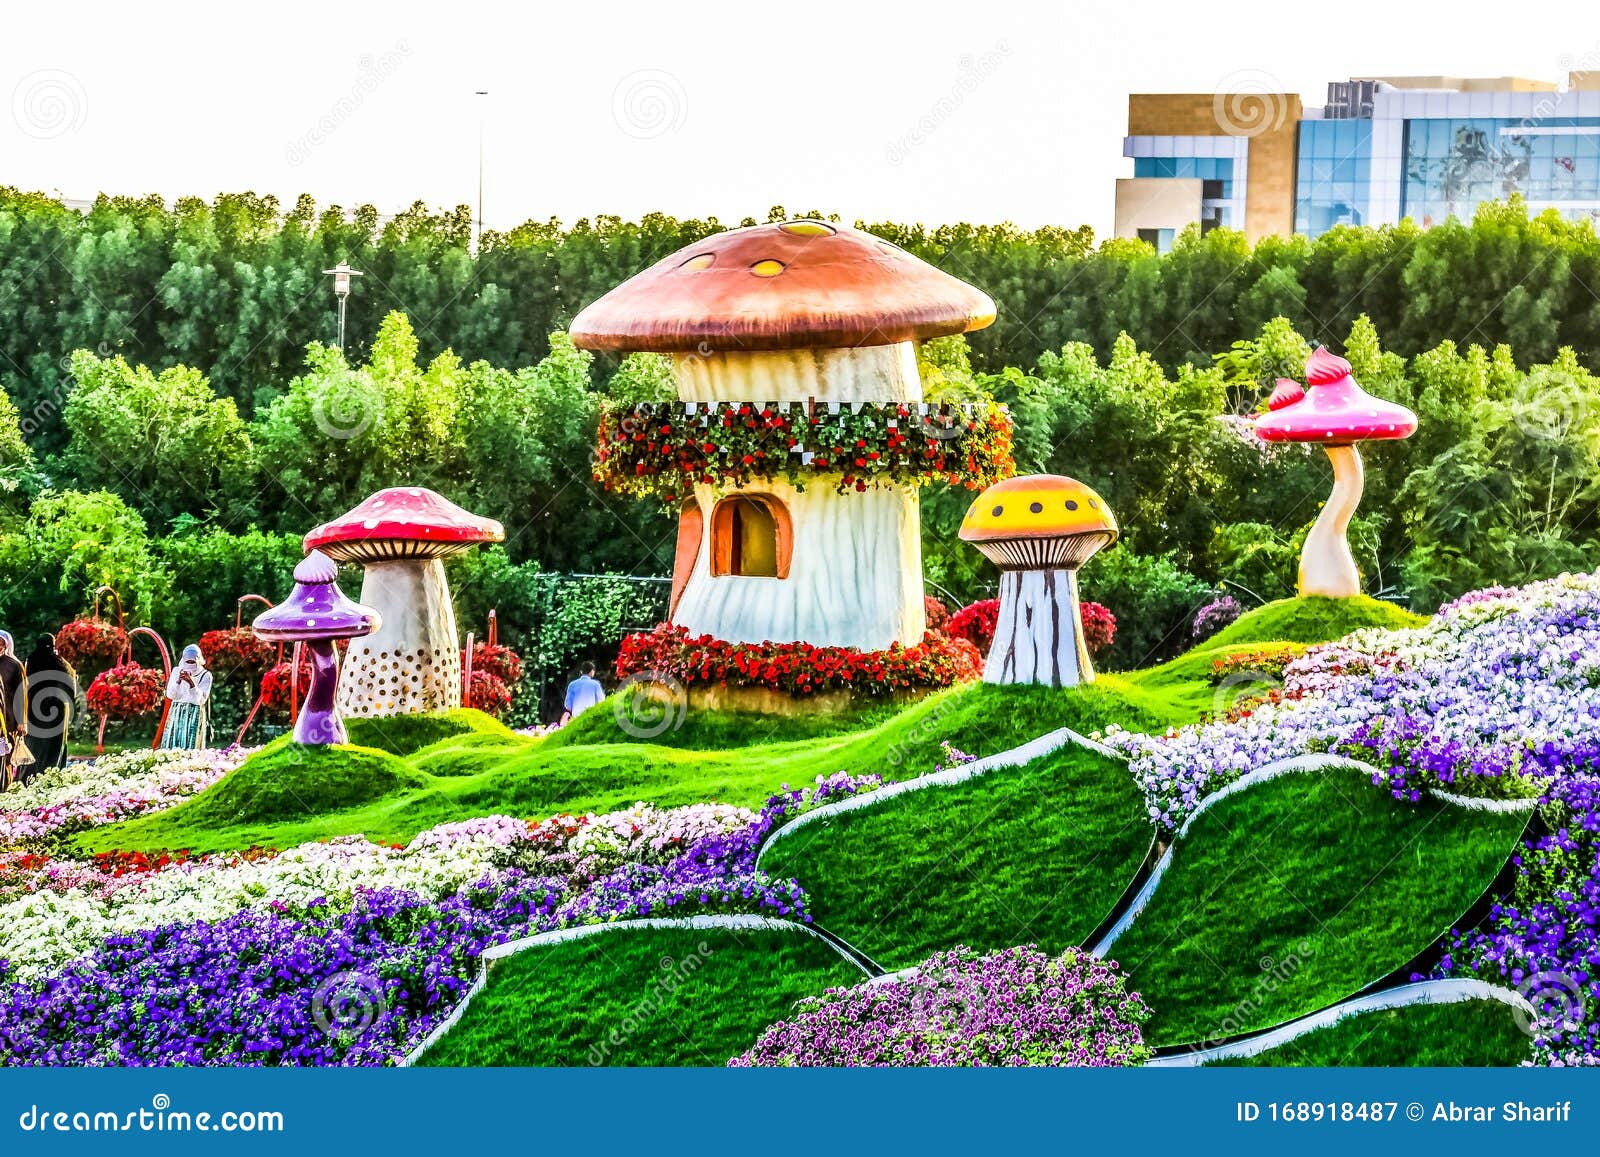 8 416 Miracle Garden Photos Free Royalty Free Stock Photos From Dreamstime